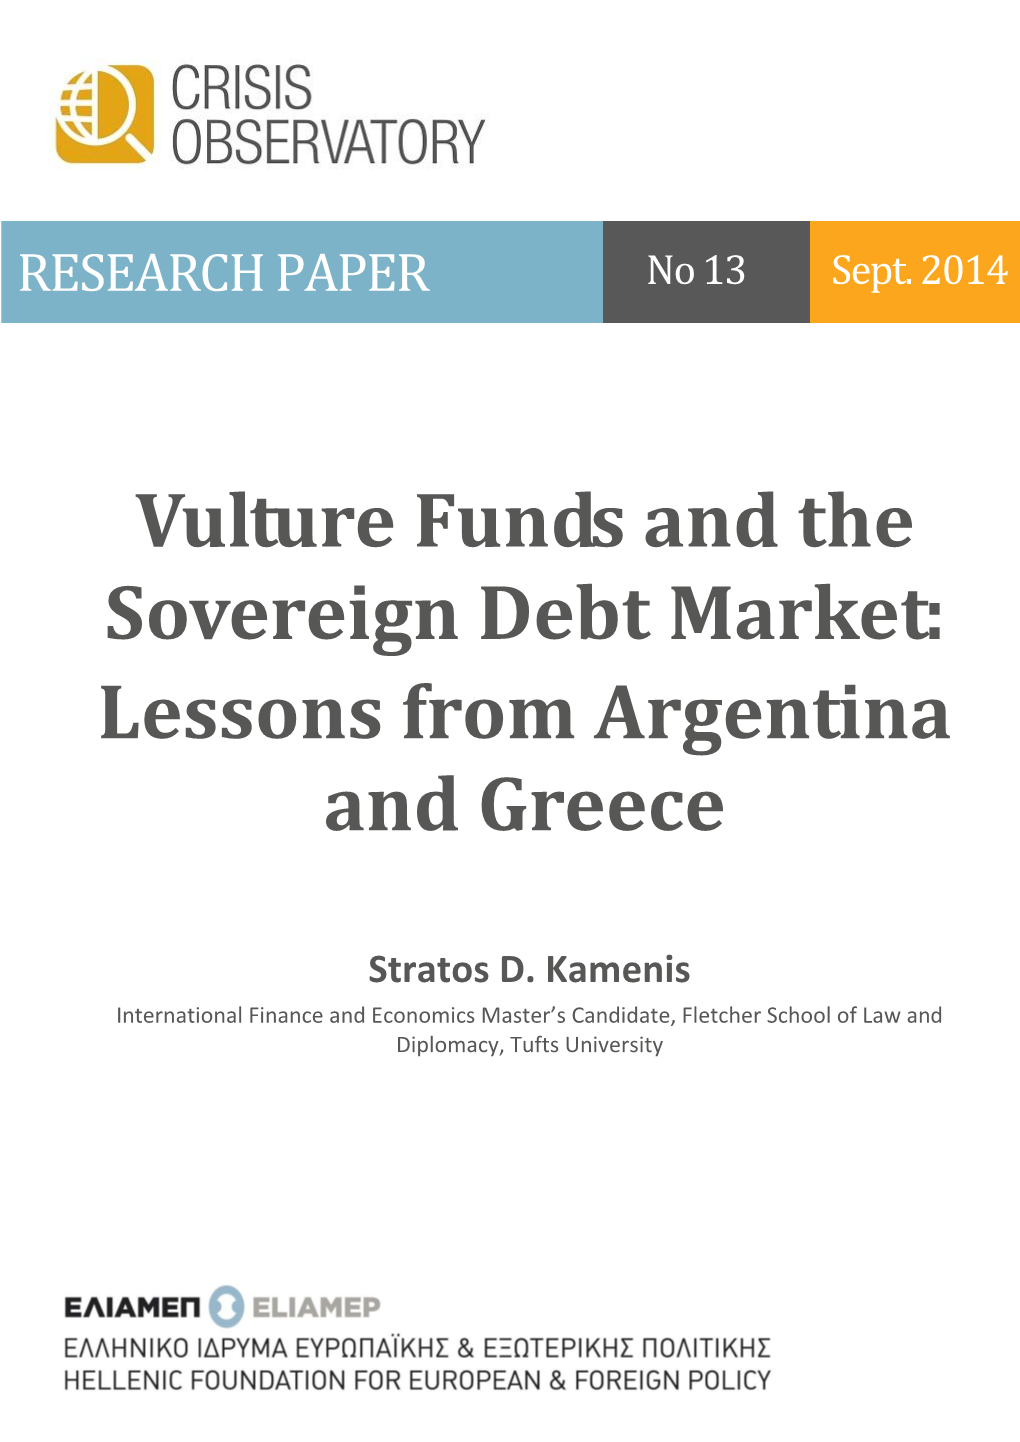 Vulture Funds and the Sovereign Debt Market: Lessons from Argentina and Greece